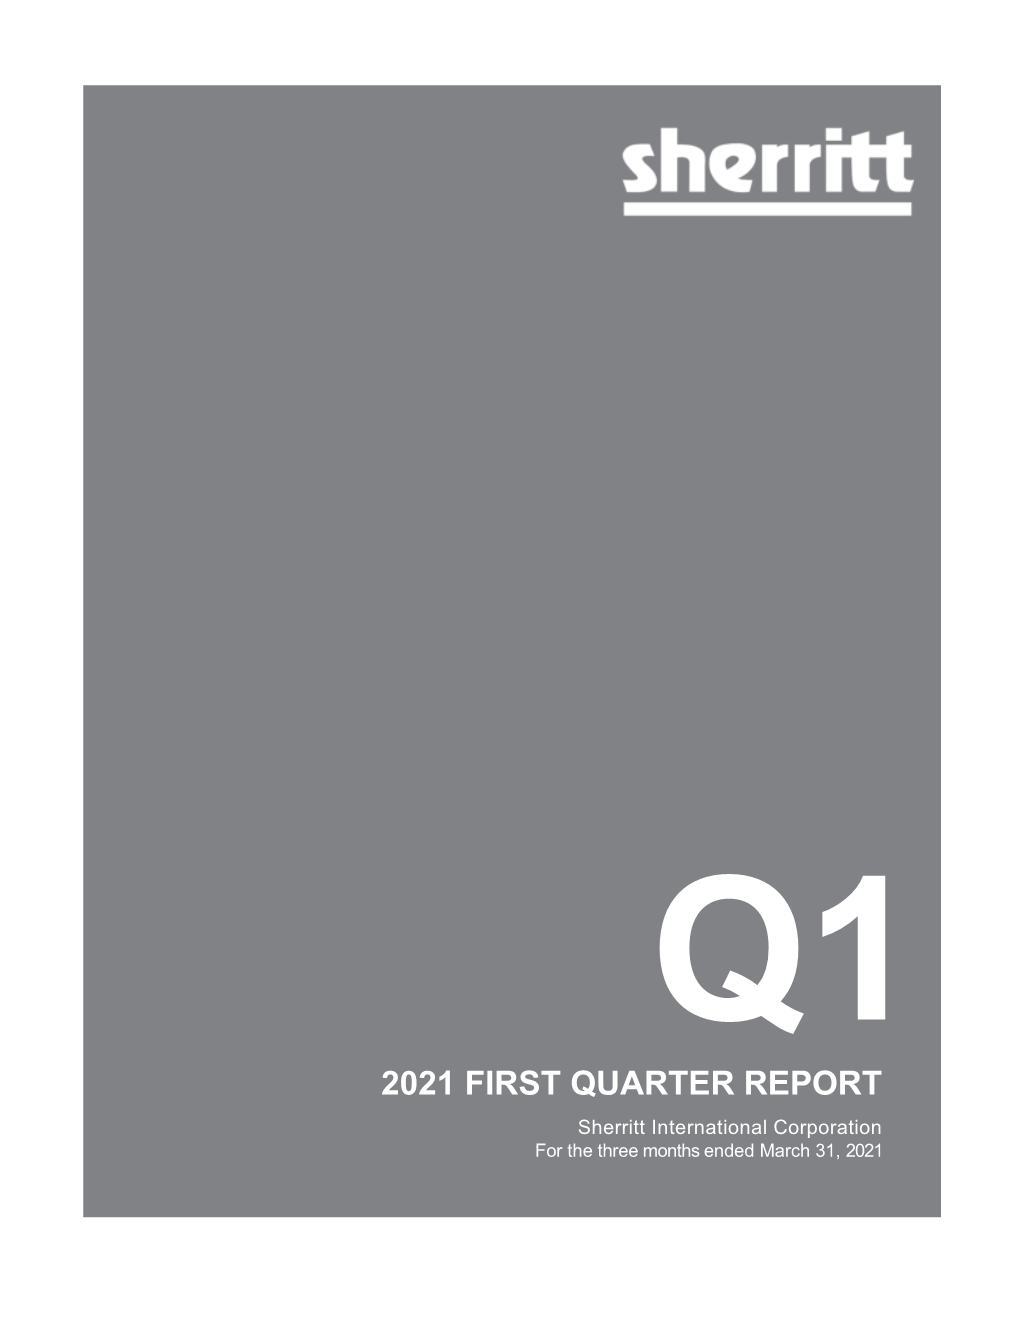 Q1 2021 Financial Results